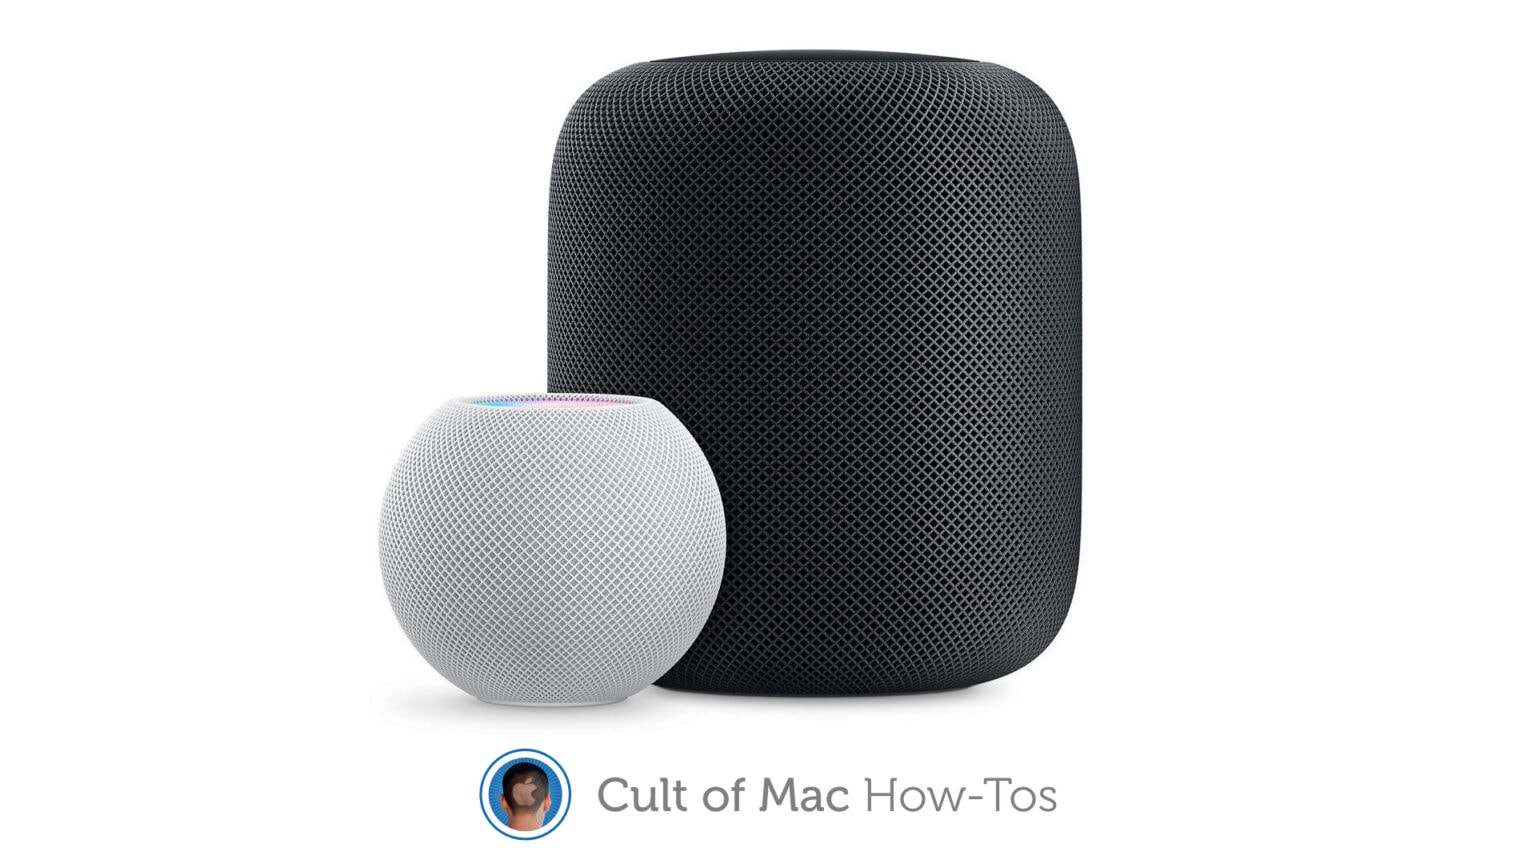 How to choose which HomePod listens to you